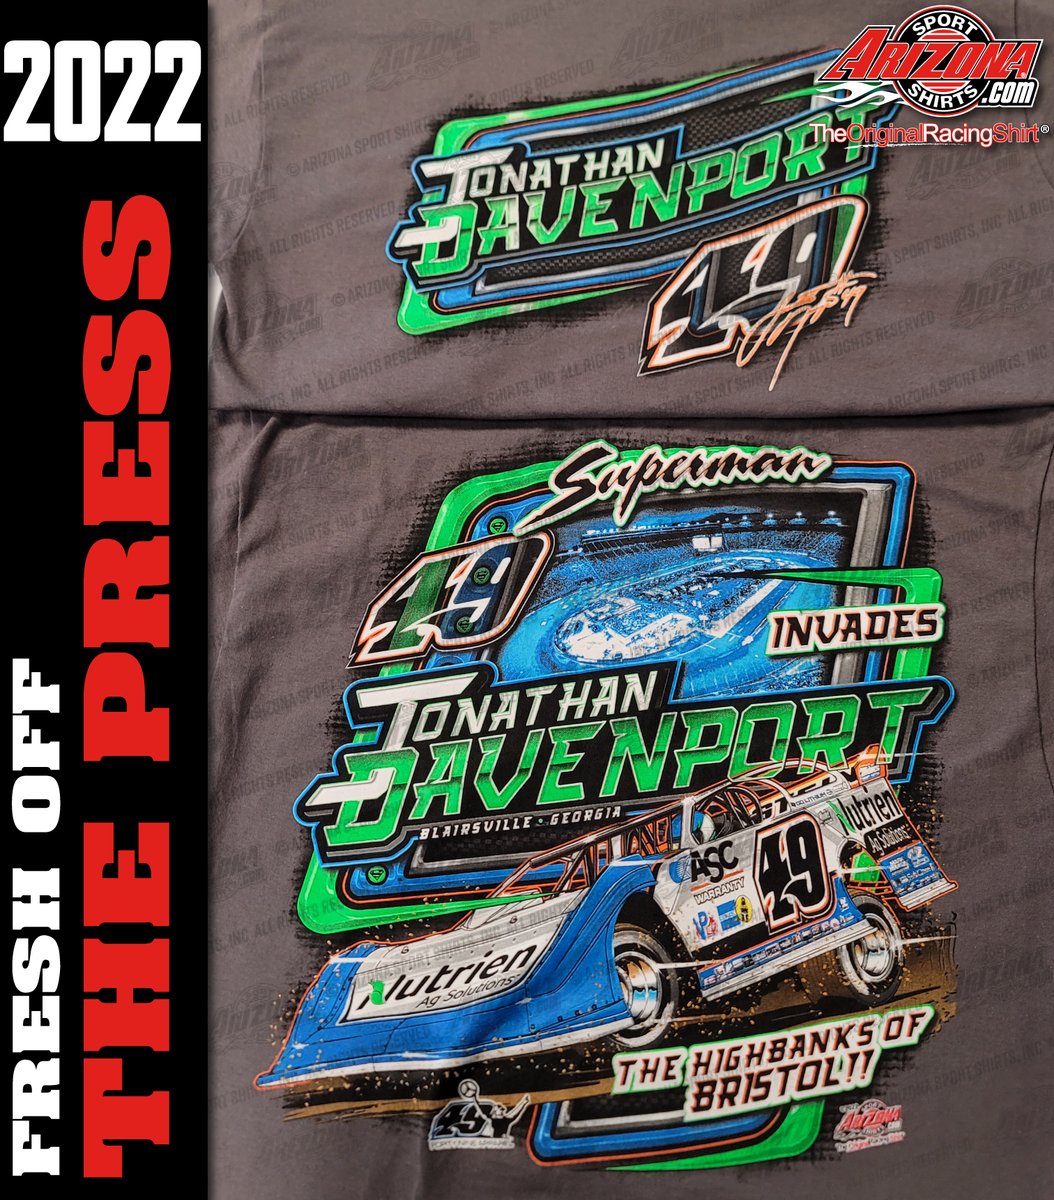 .@TheFast49 invades the highbanks of Bristol!

Get this new shirt while at Bristol Motor Speedway or on his website: https://t.co/kZlw9d3i6Z

#TheOriginalRacingShirt https://t.co/fr4J96k5wL